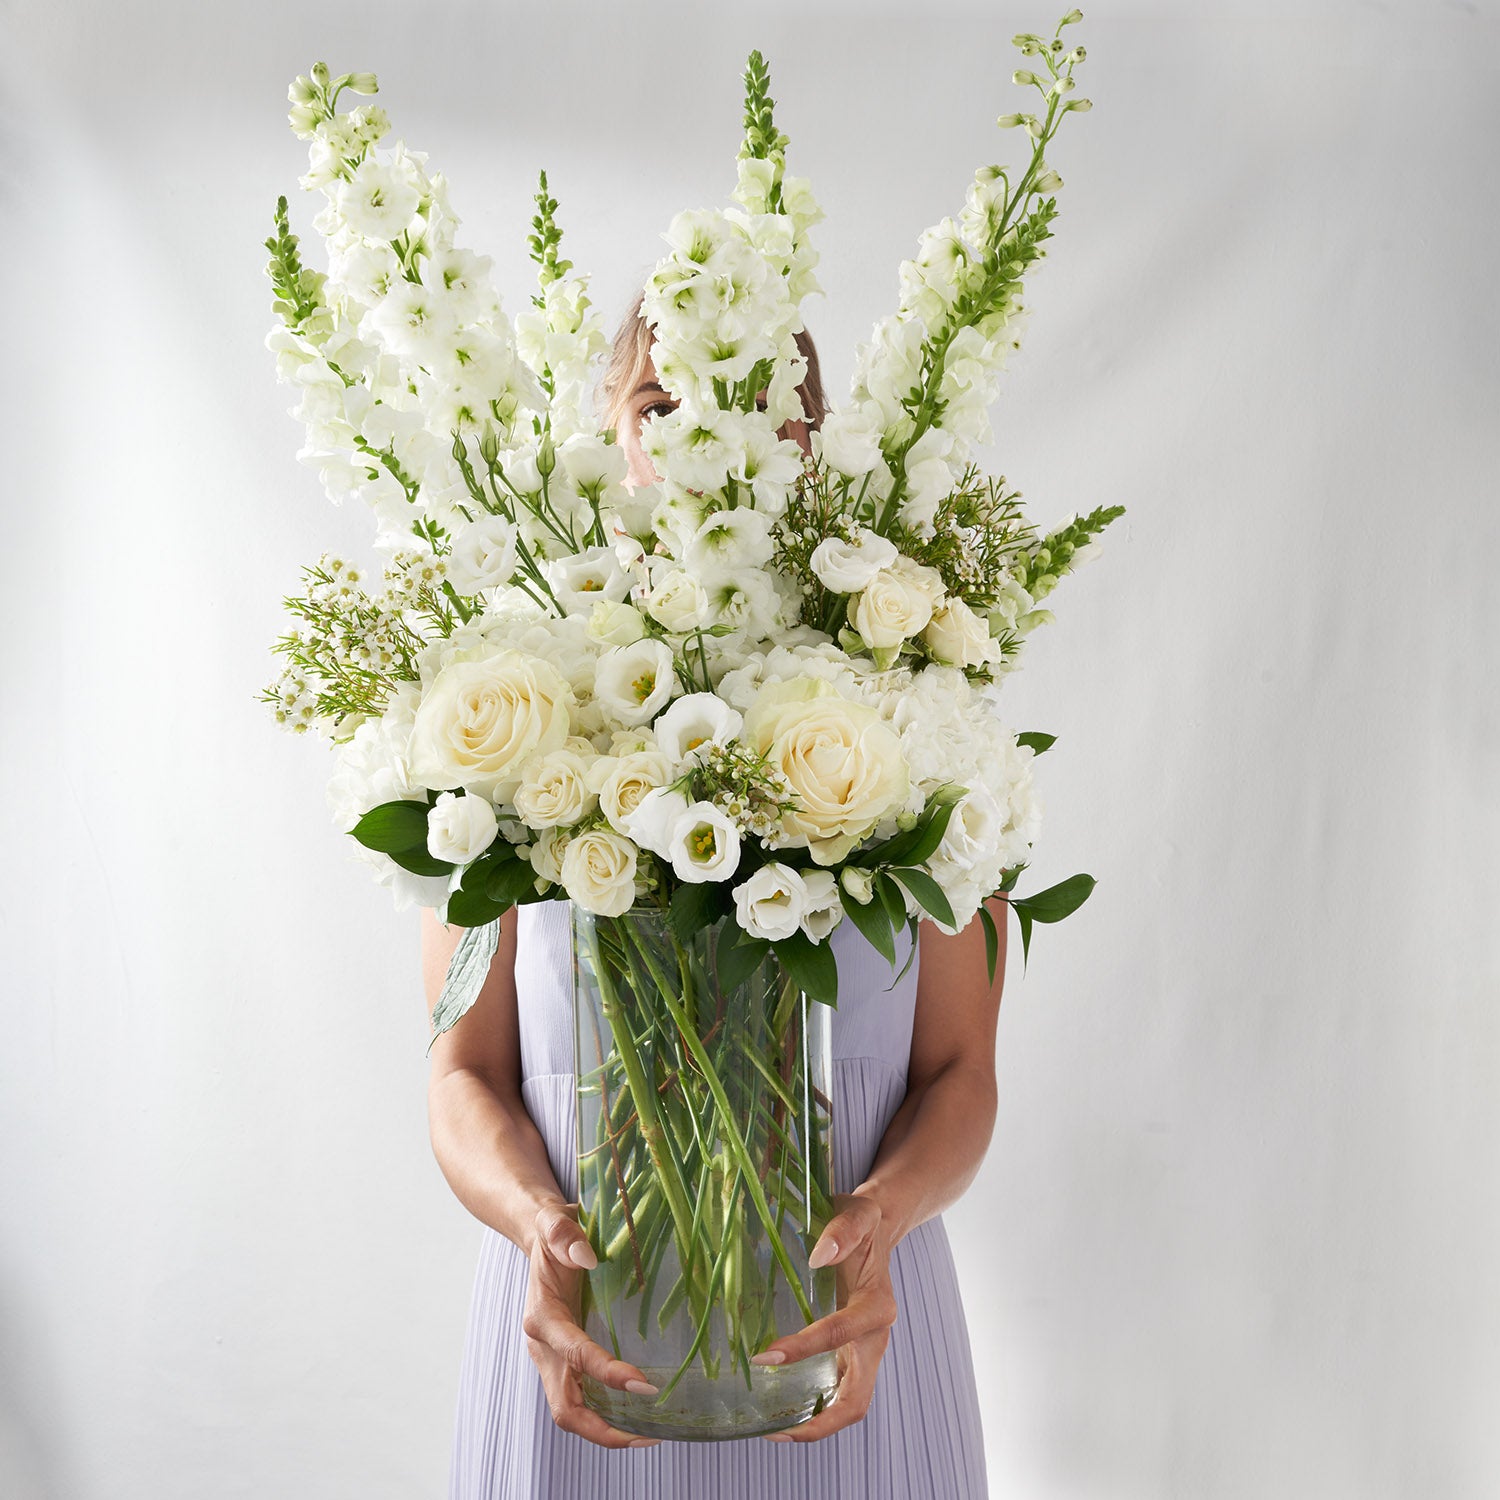 Woman in mauve dress holding large vase of white flowers including white roses, delphinium, and lisianthus.